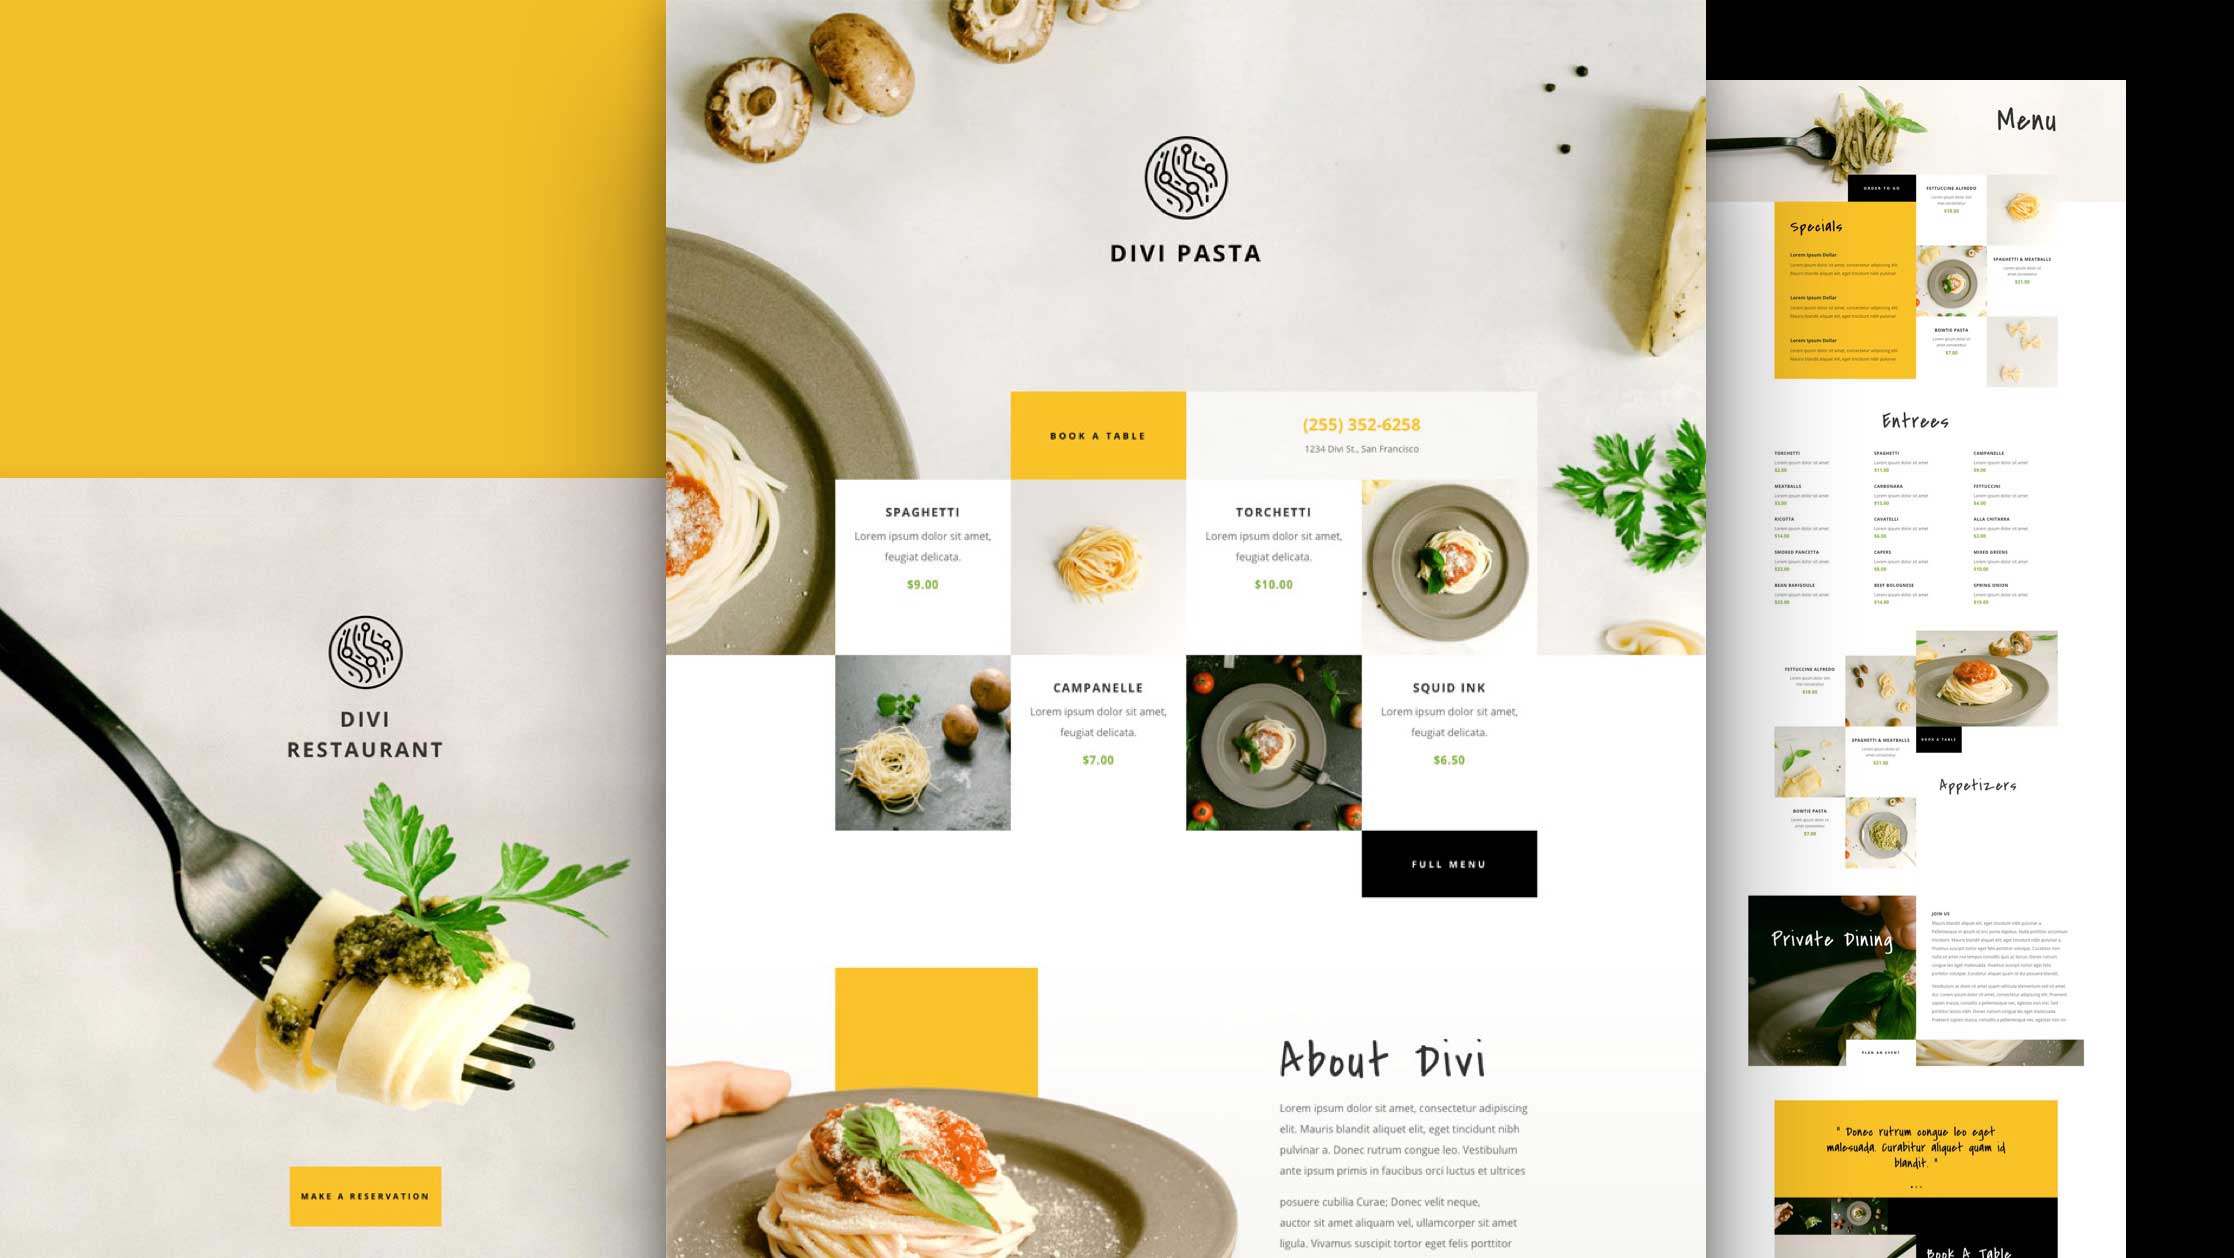 Get a FREE Italian Restaurant Layout Pack for Divi